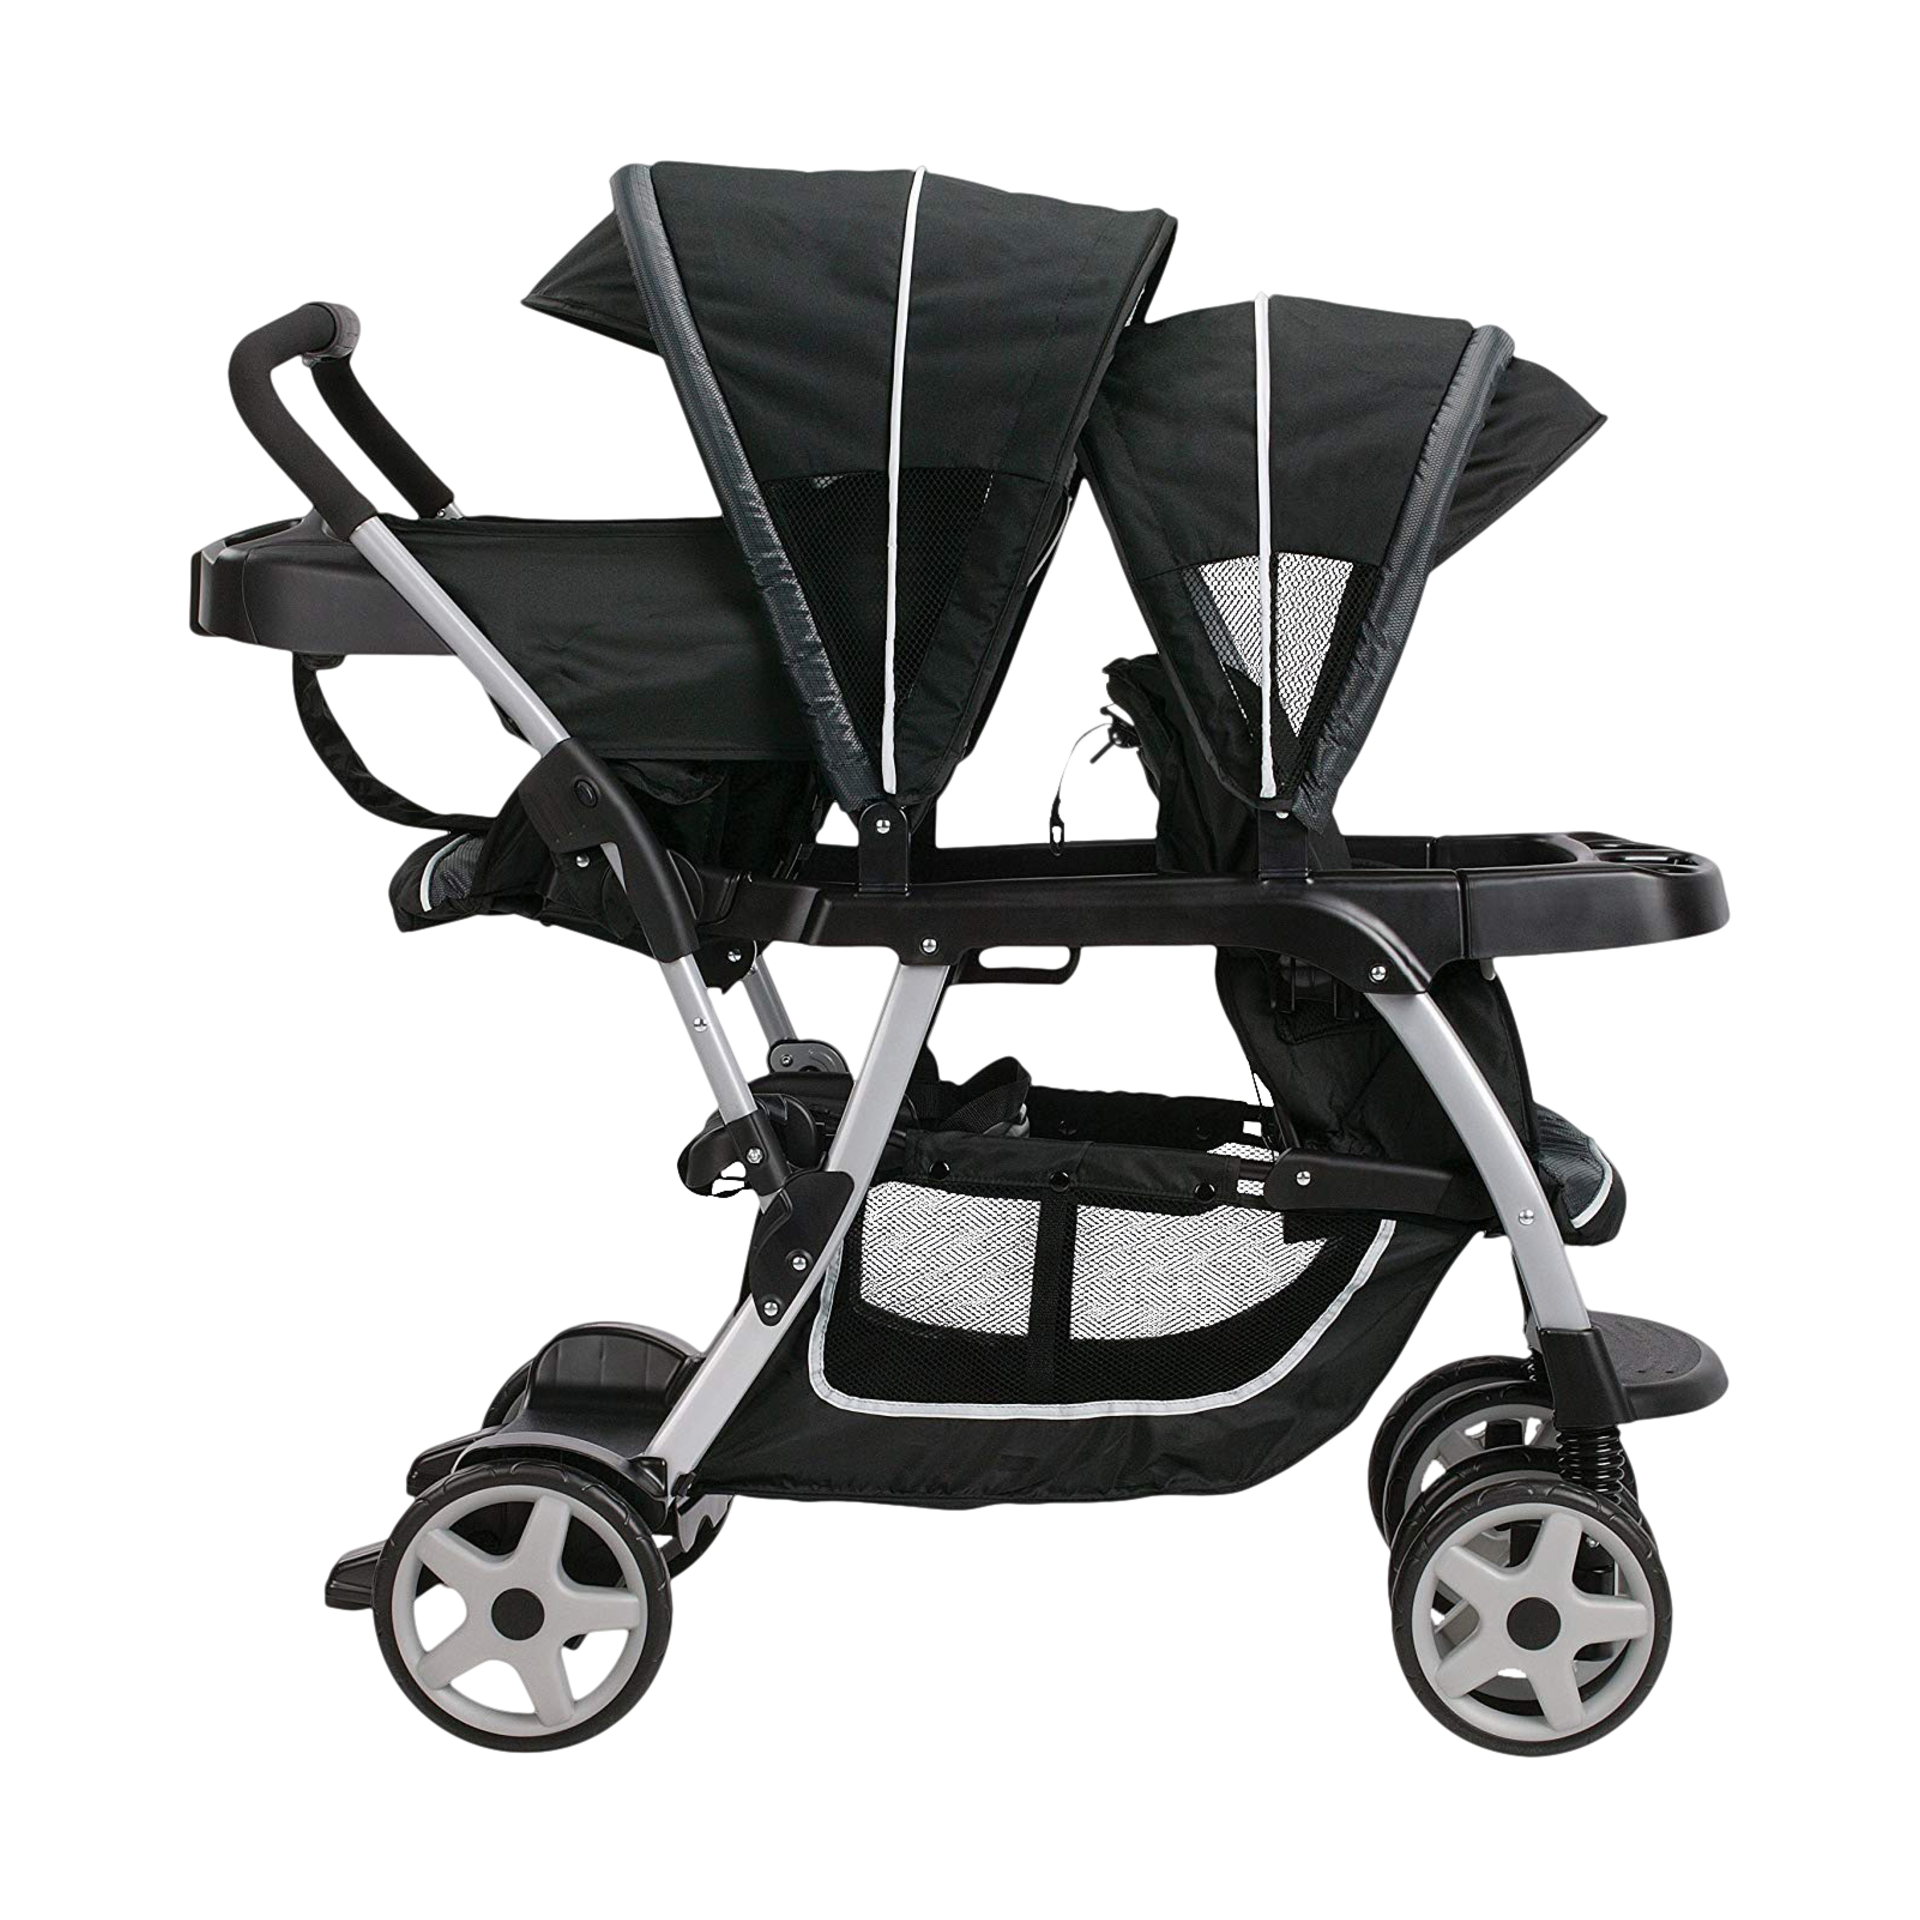 graco ready to grow lx double stroller